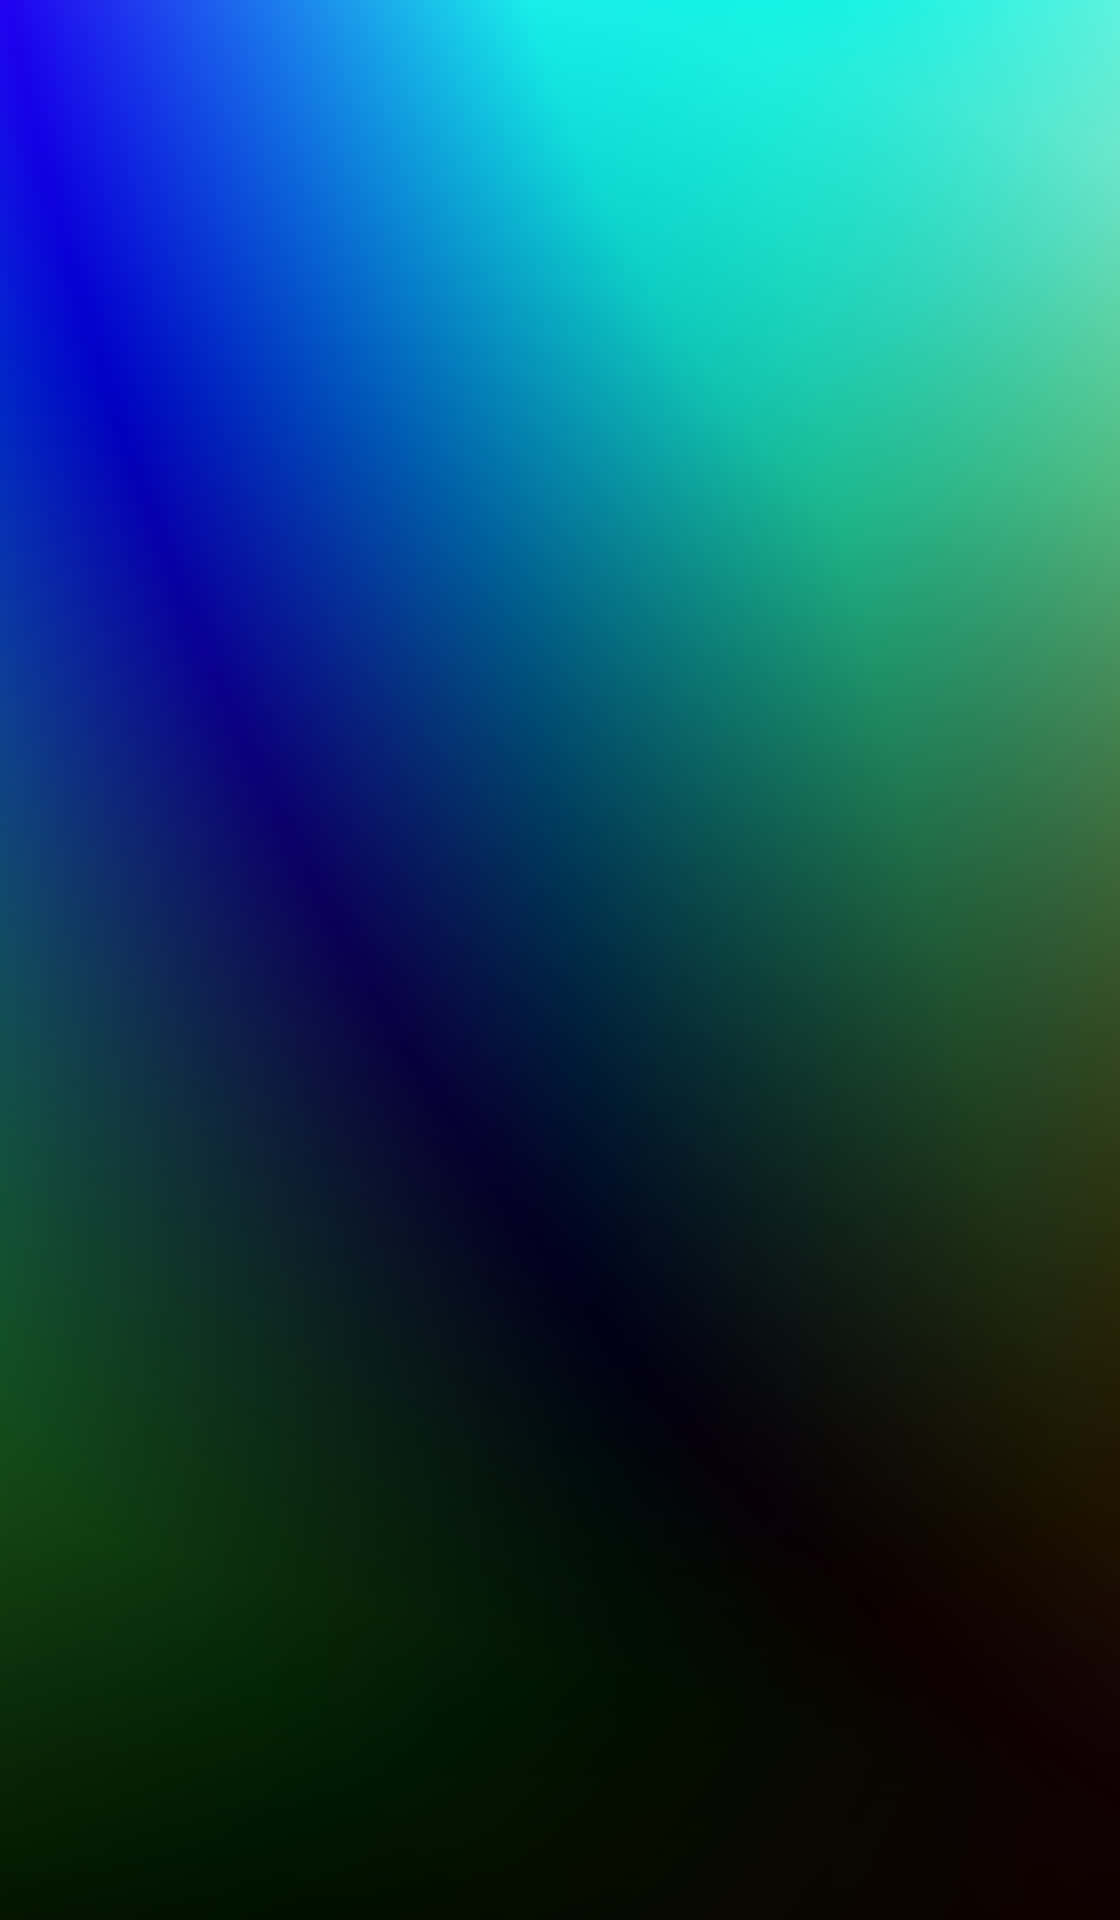 Rich blue and green shades showcasing a colorful gradient